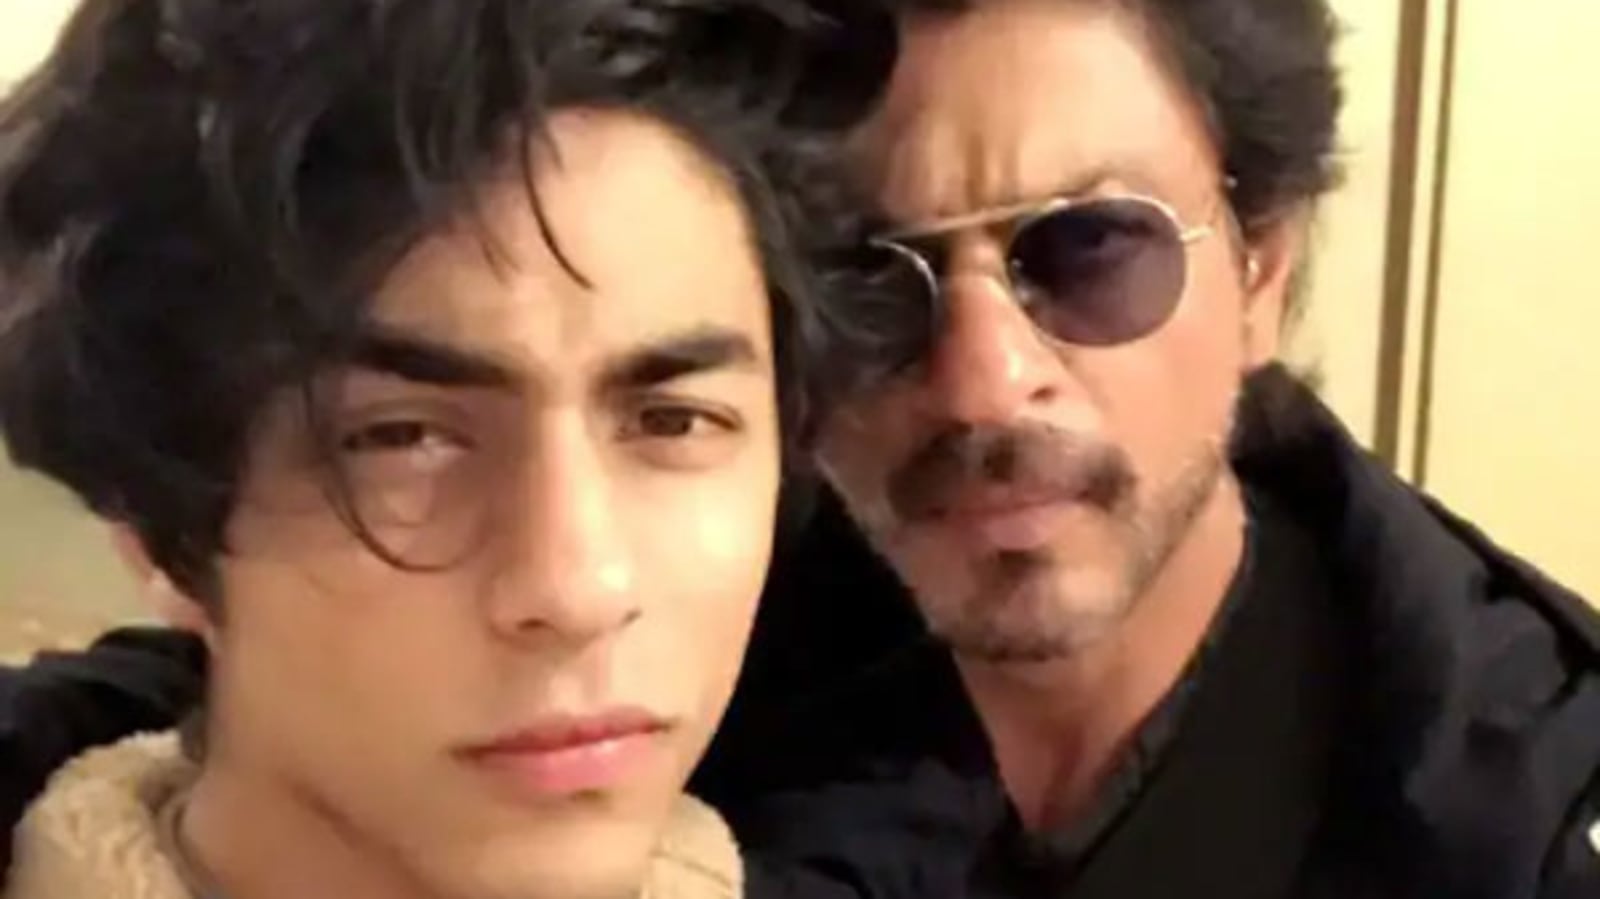 Shah Rukh Khan's son Aryan Khan questioned by NCB after it raids cruise ship rave party | Bollywood - Hindustan Times